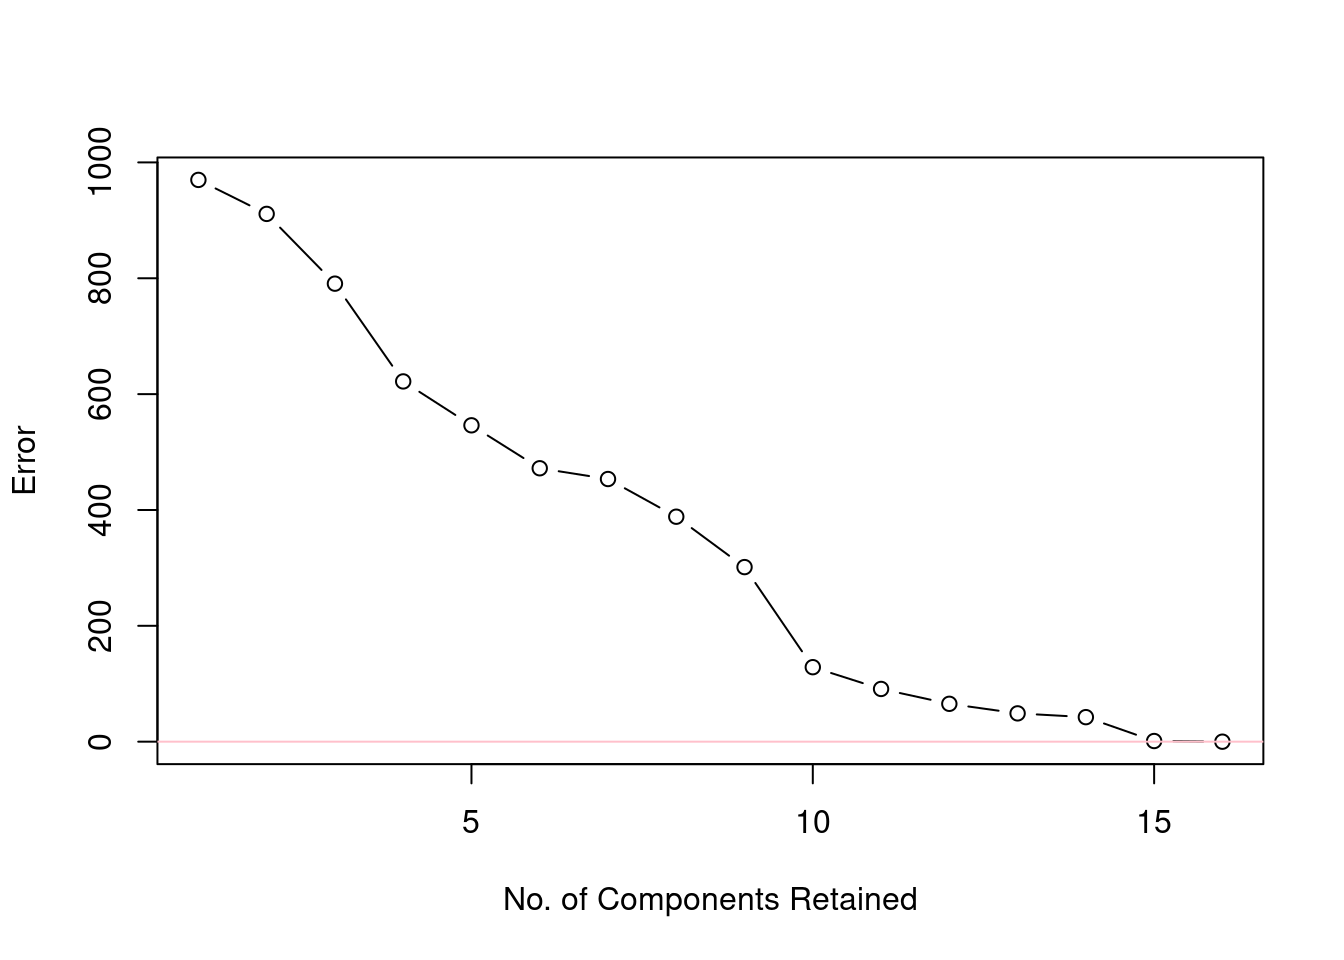 Reduction of error as the number of components included in the reconstruction increases.